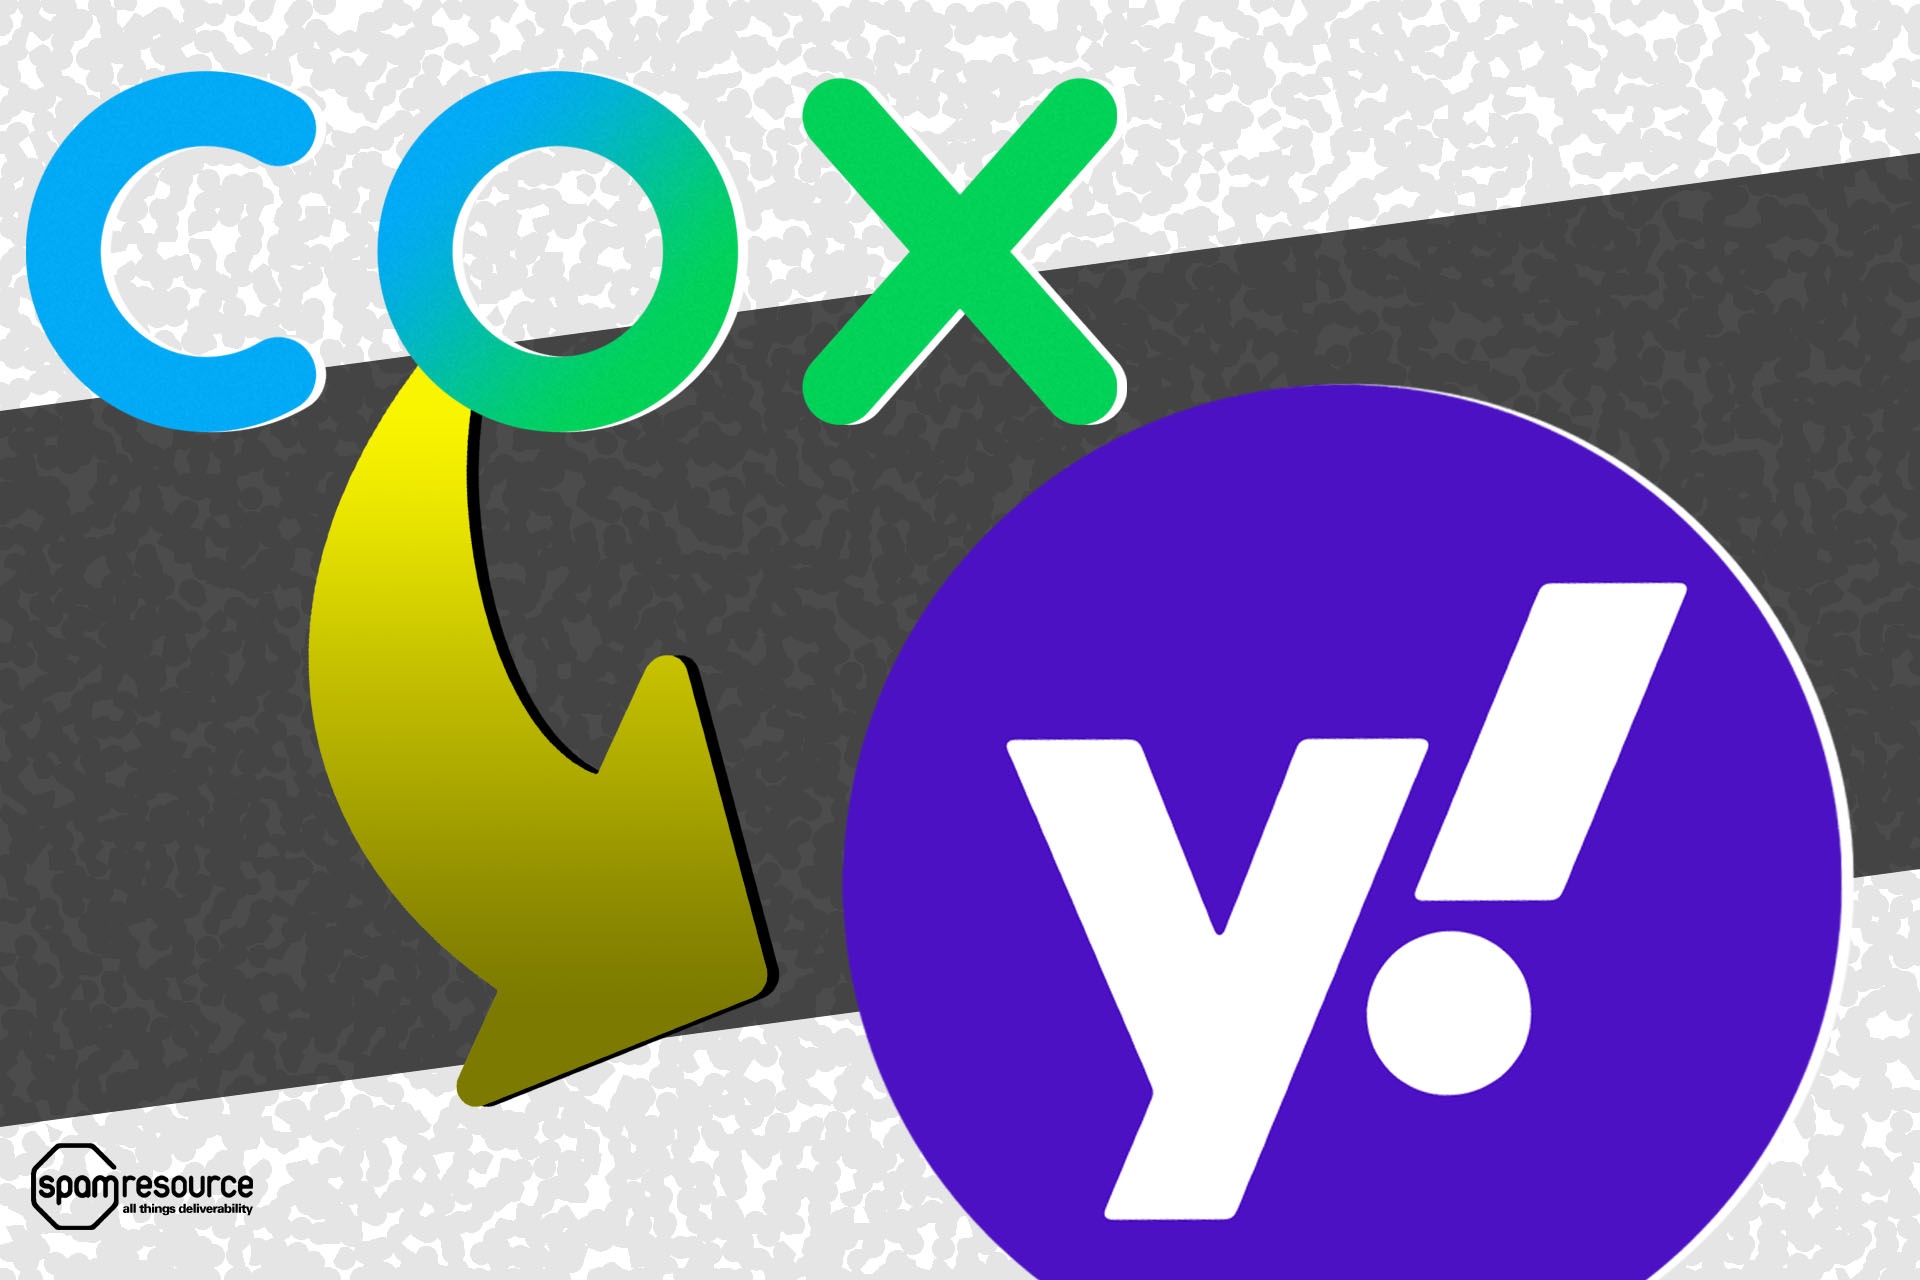 Cox.net subscribers to land in Yahoo Mail